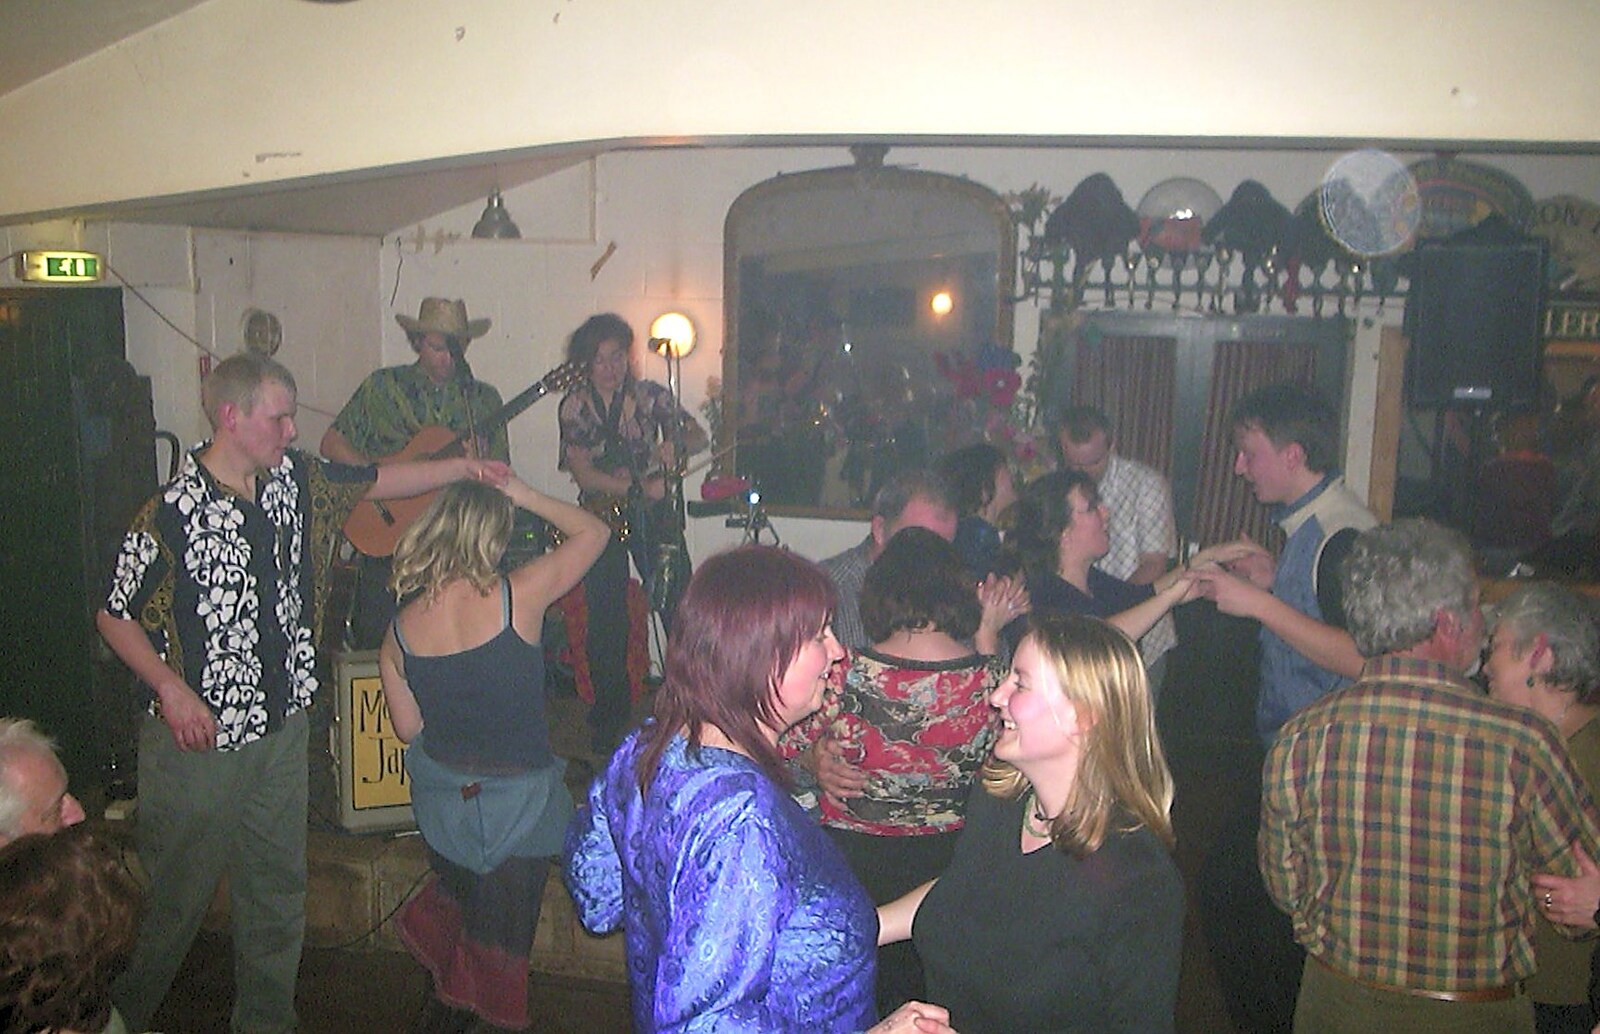 Dancing crowds in the Banham Barrel from The Swan's Cellar, and Bill's Mambo Night at the Barrel, Banham, Norfolk - 6th February 2004